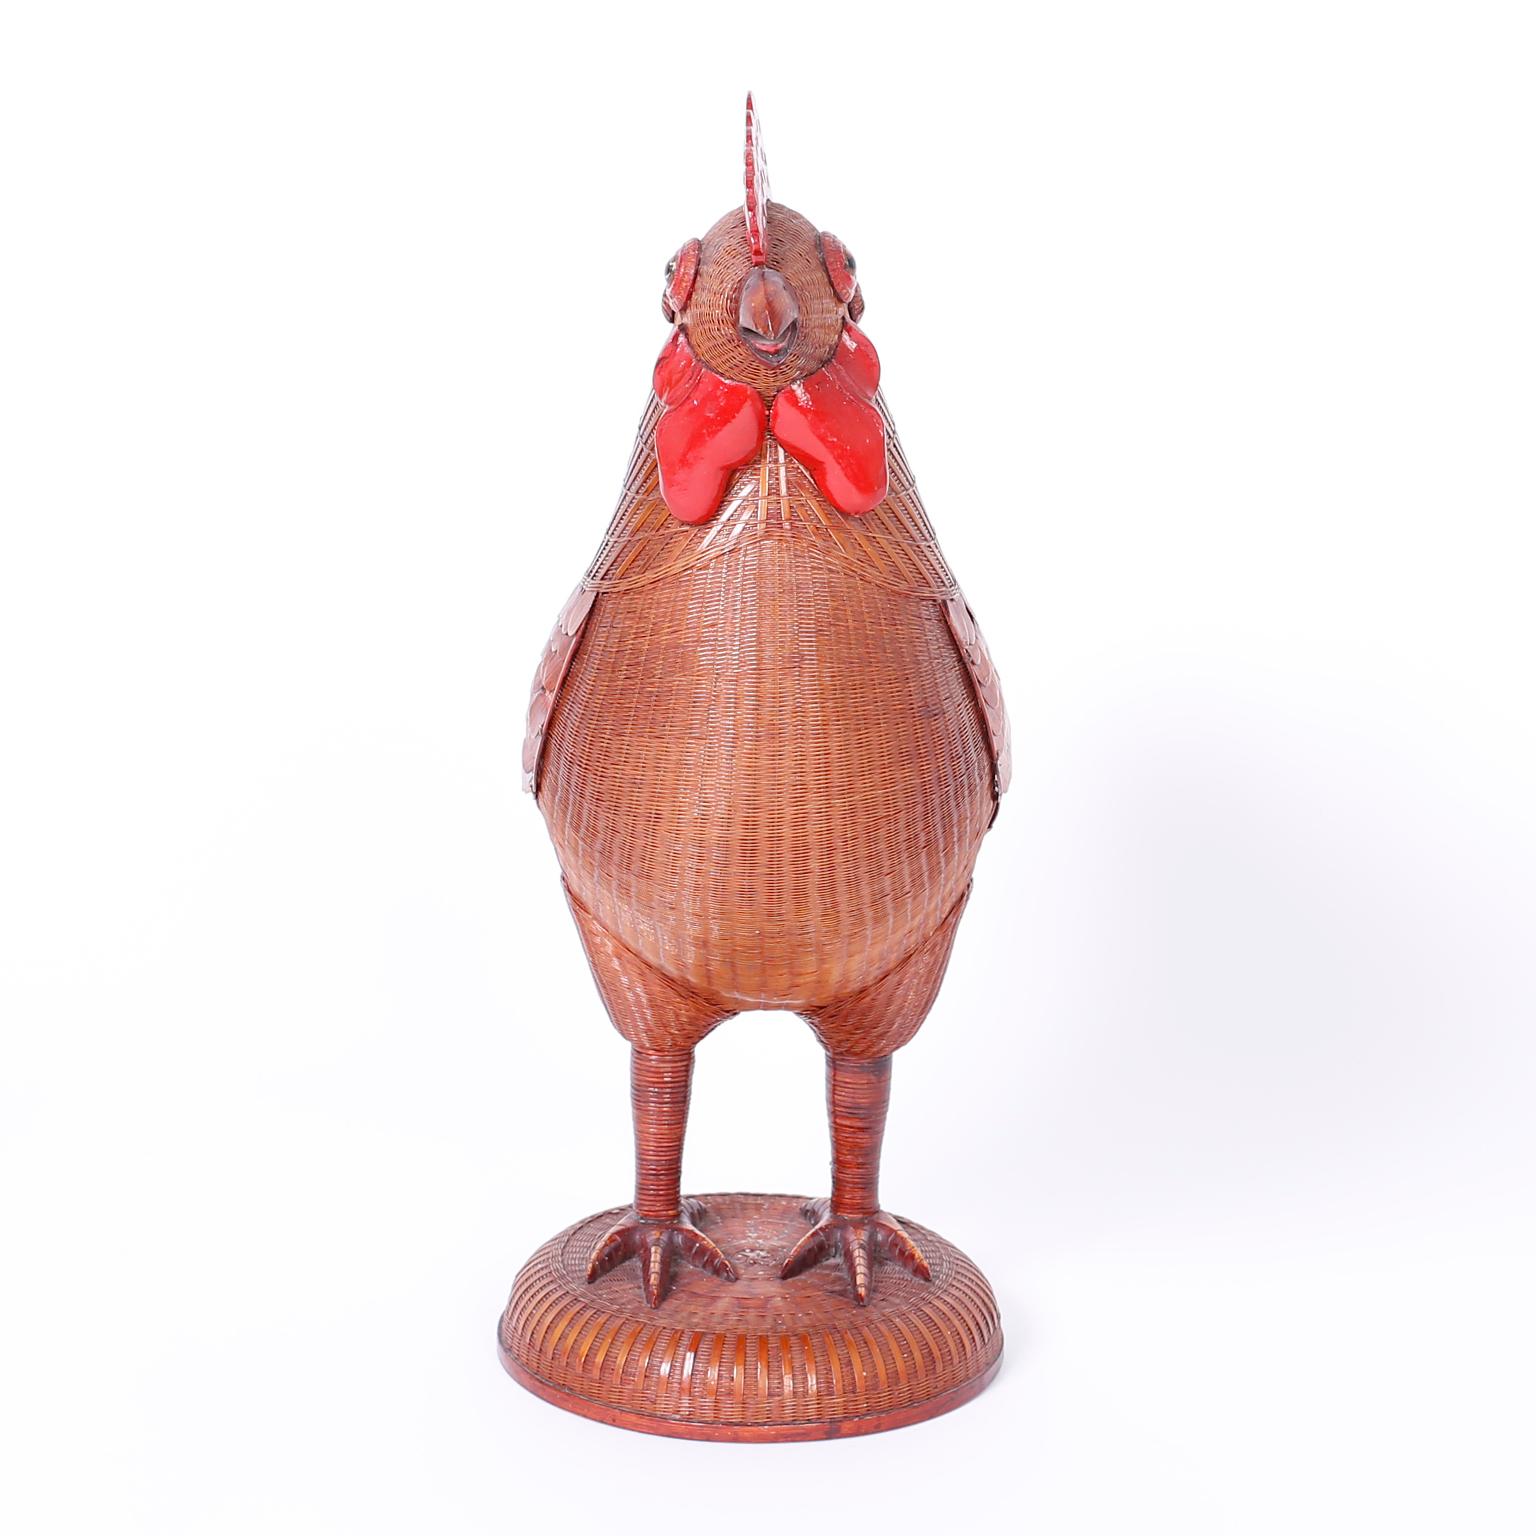 From the famed Shanghai collection, a remarkable handcrafted rooster constructed with wicker, rattan, and wood with red painted highlights.